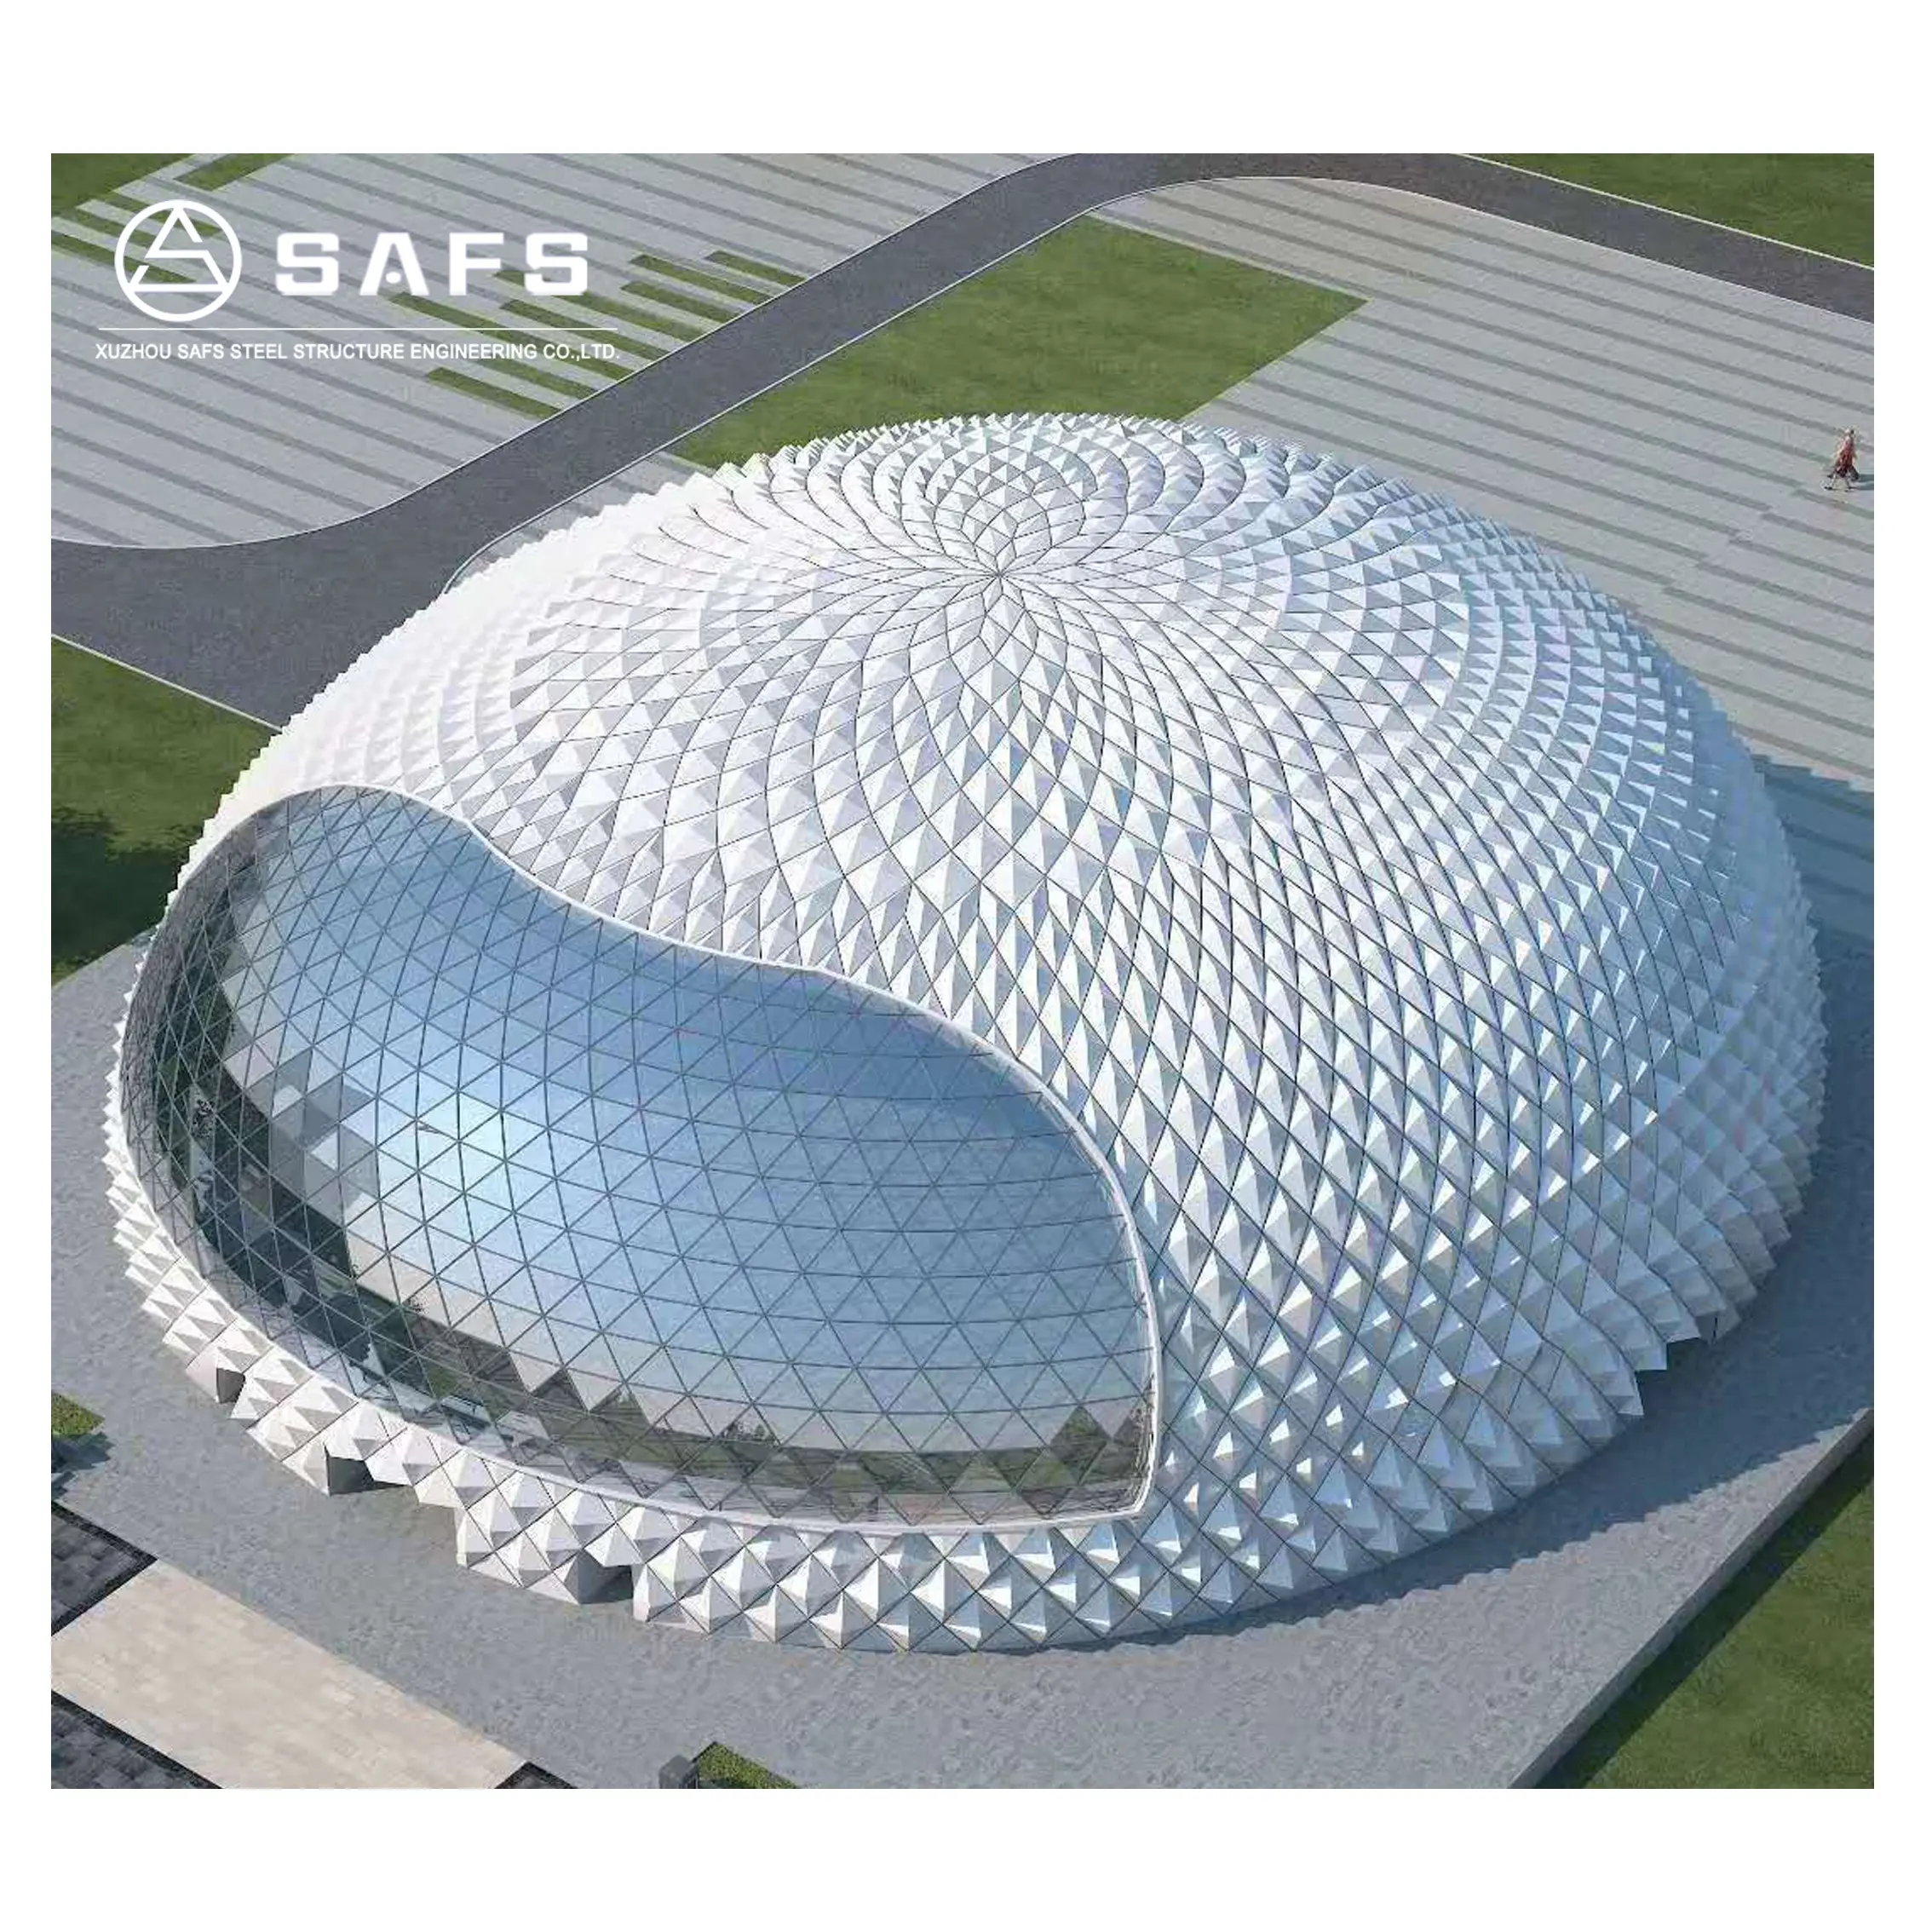 Space frame shopping mall steel structure building design